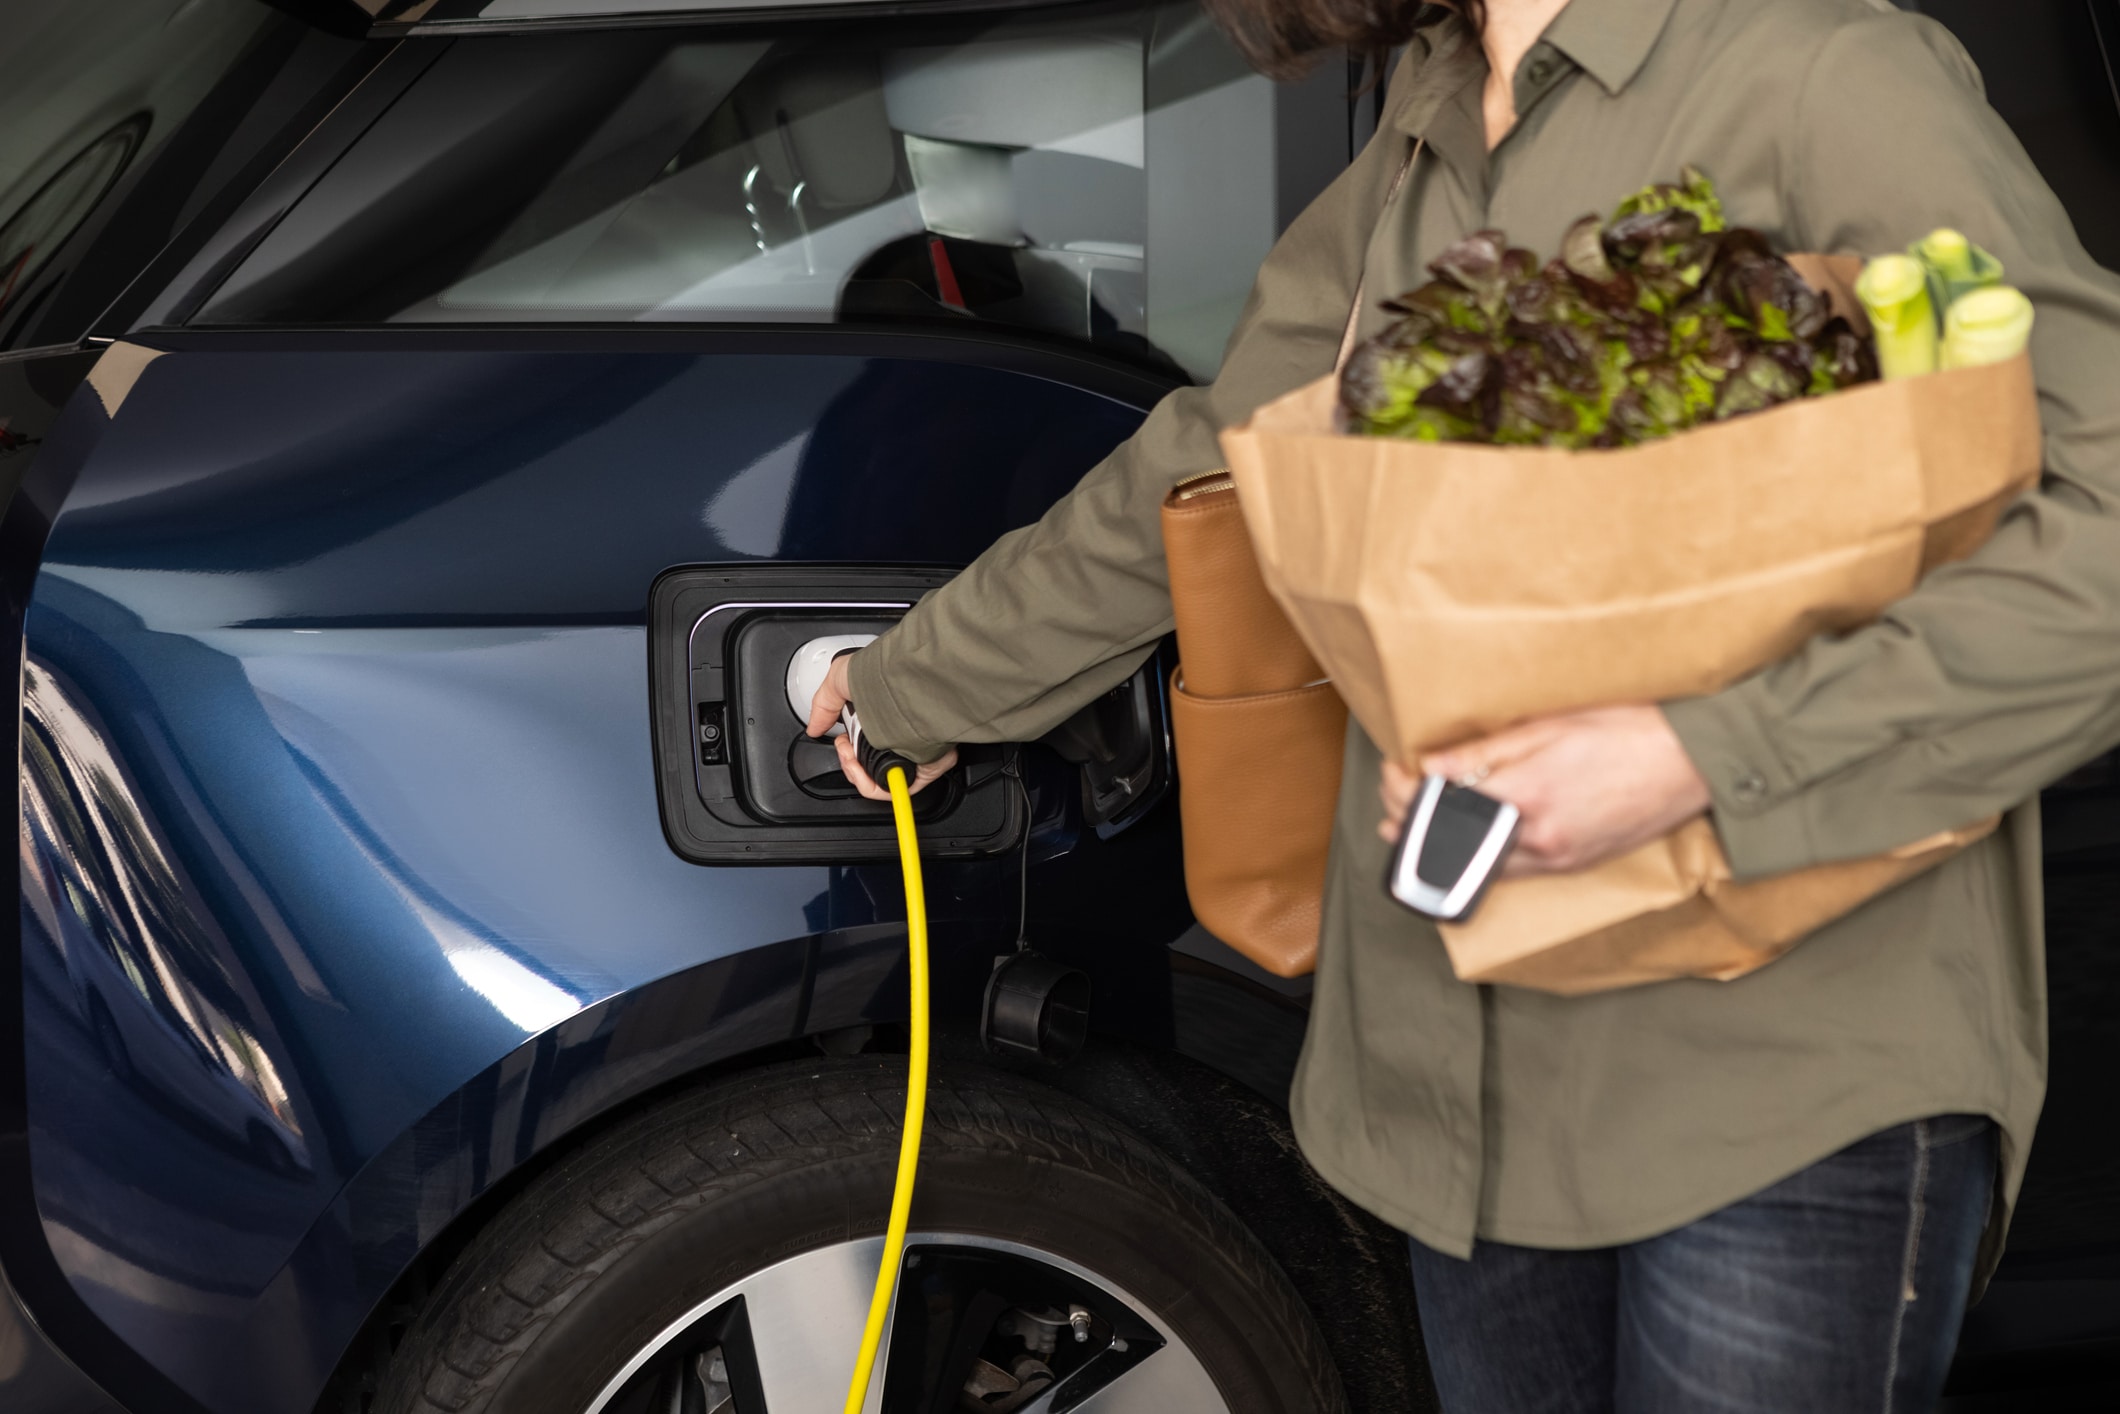 Woman plugs a charger to electric car socket at home after shopping groceries.